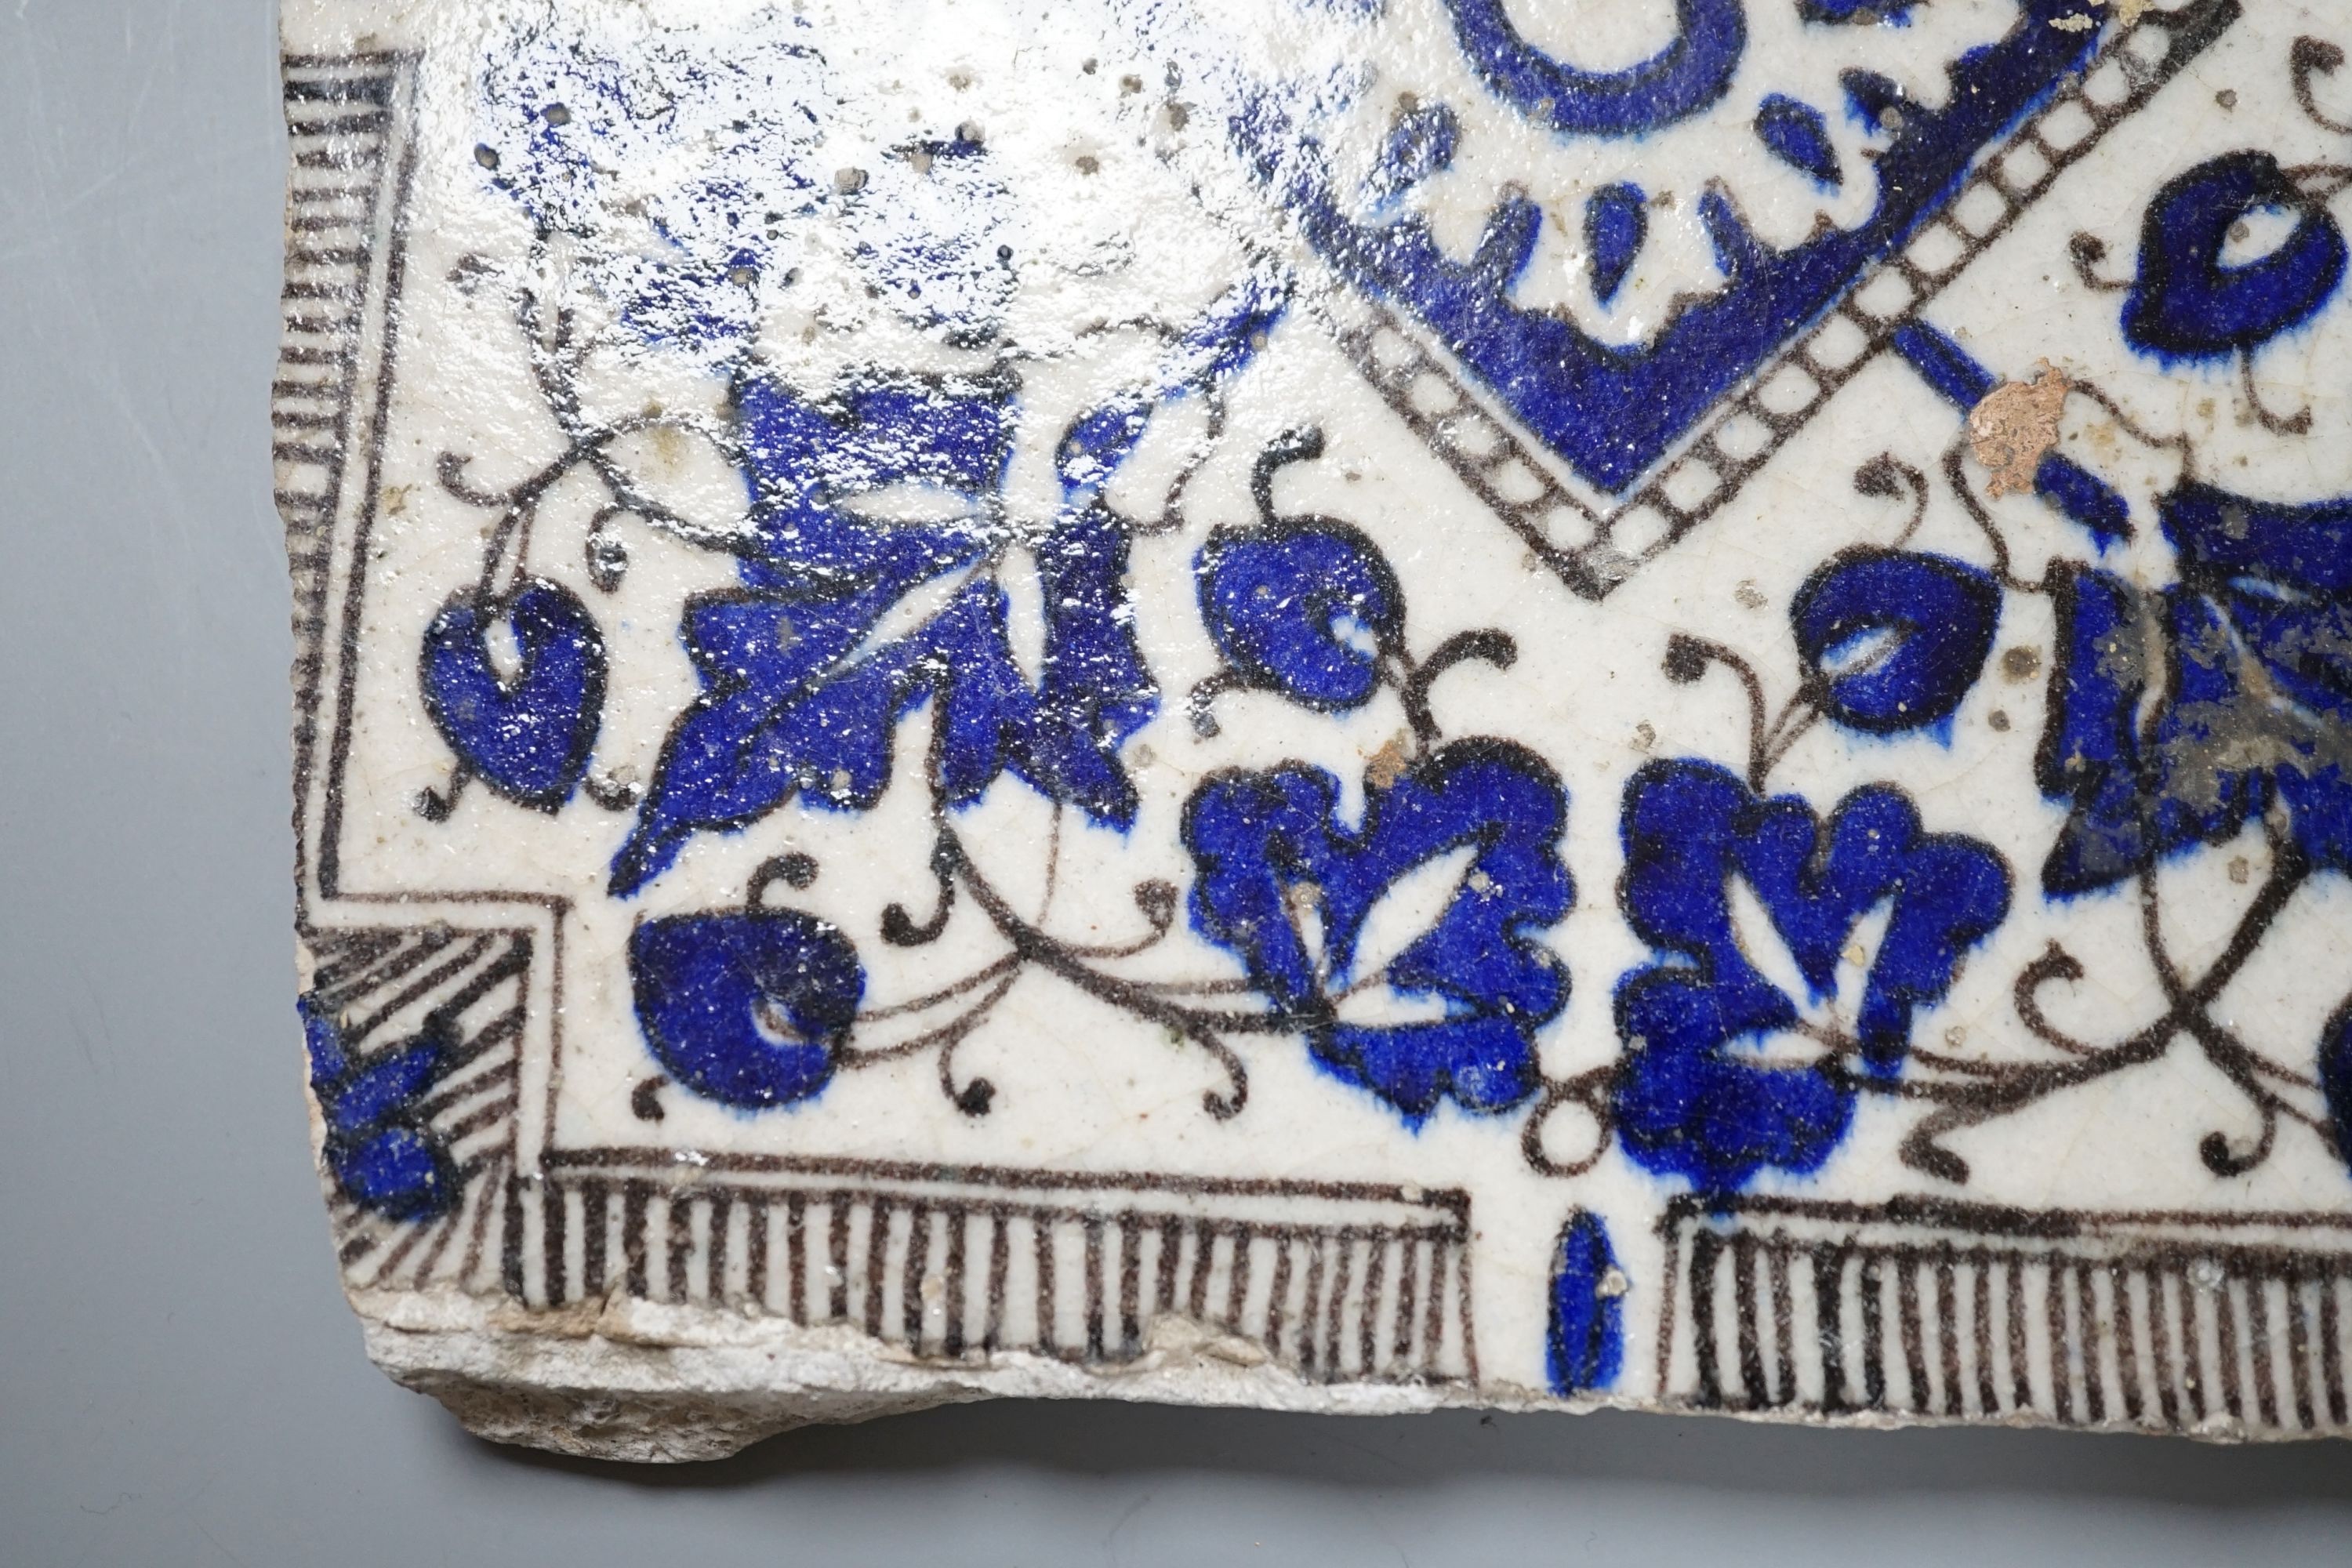 A Persian blue and white ceramic tile - 21 x 20cm